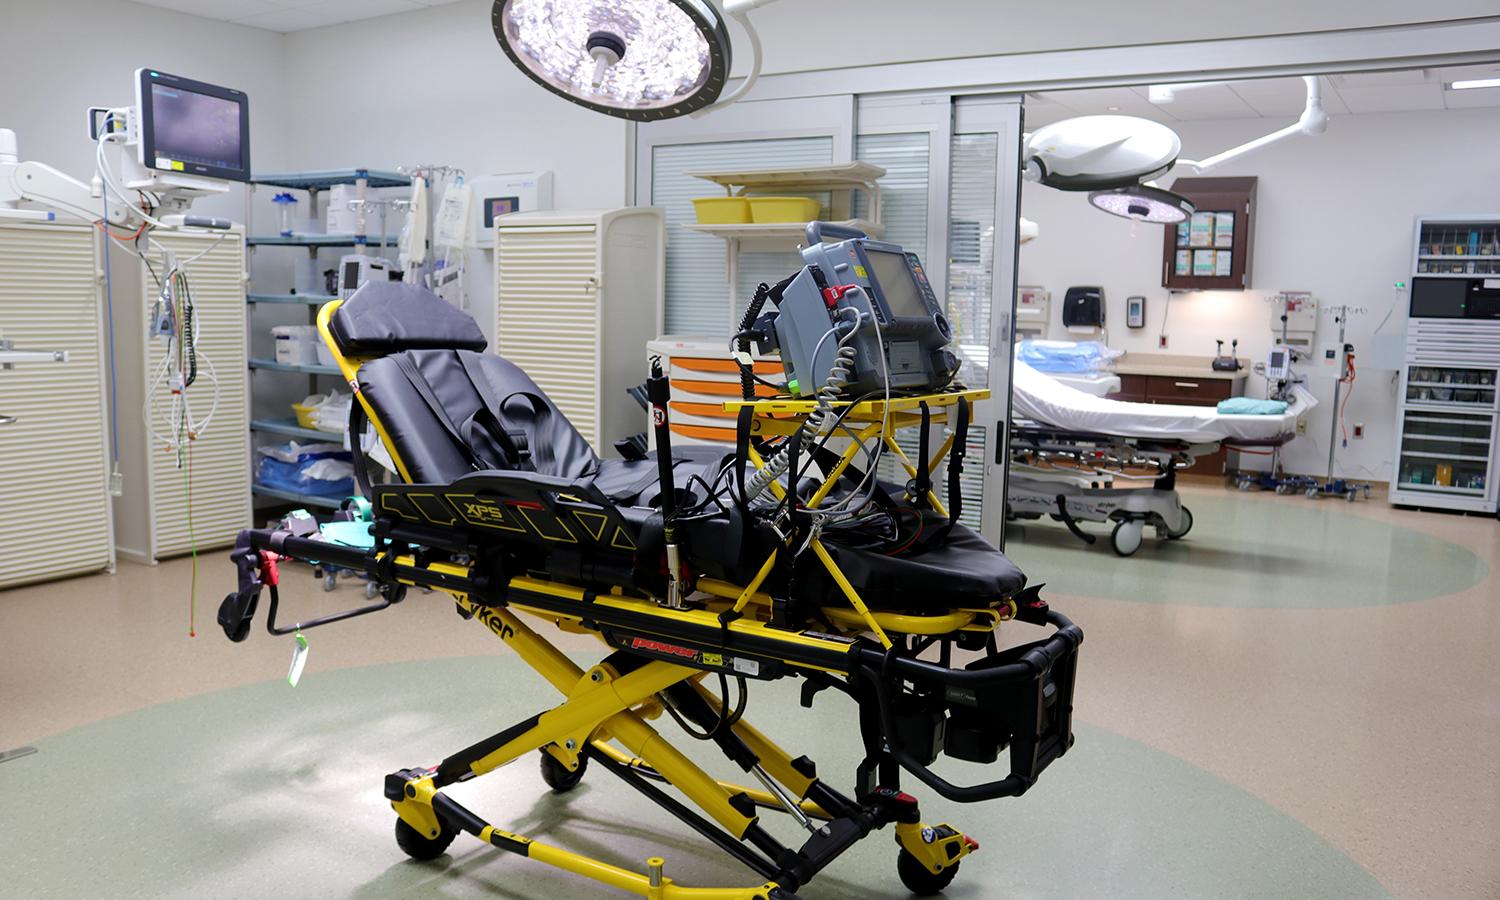 A hospital facility emergency department is seen.